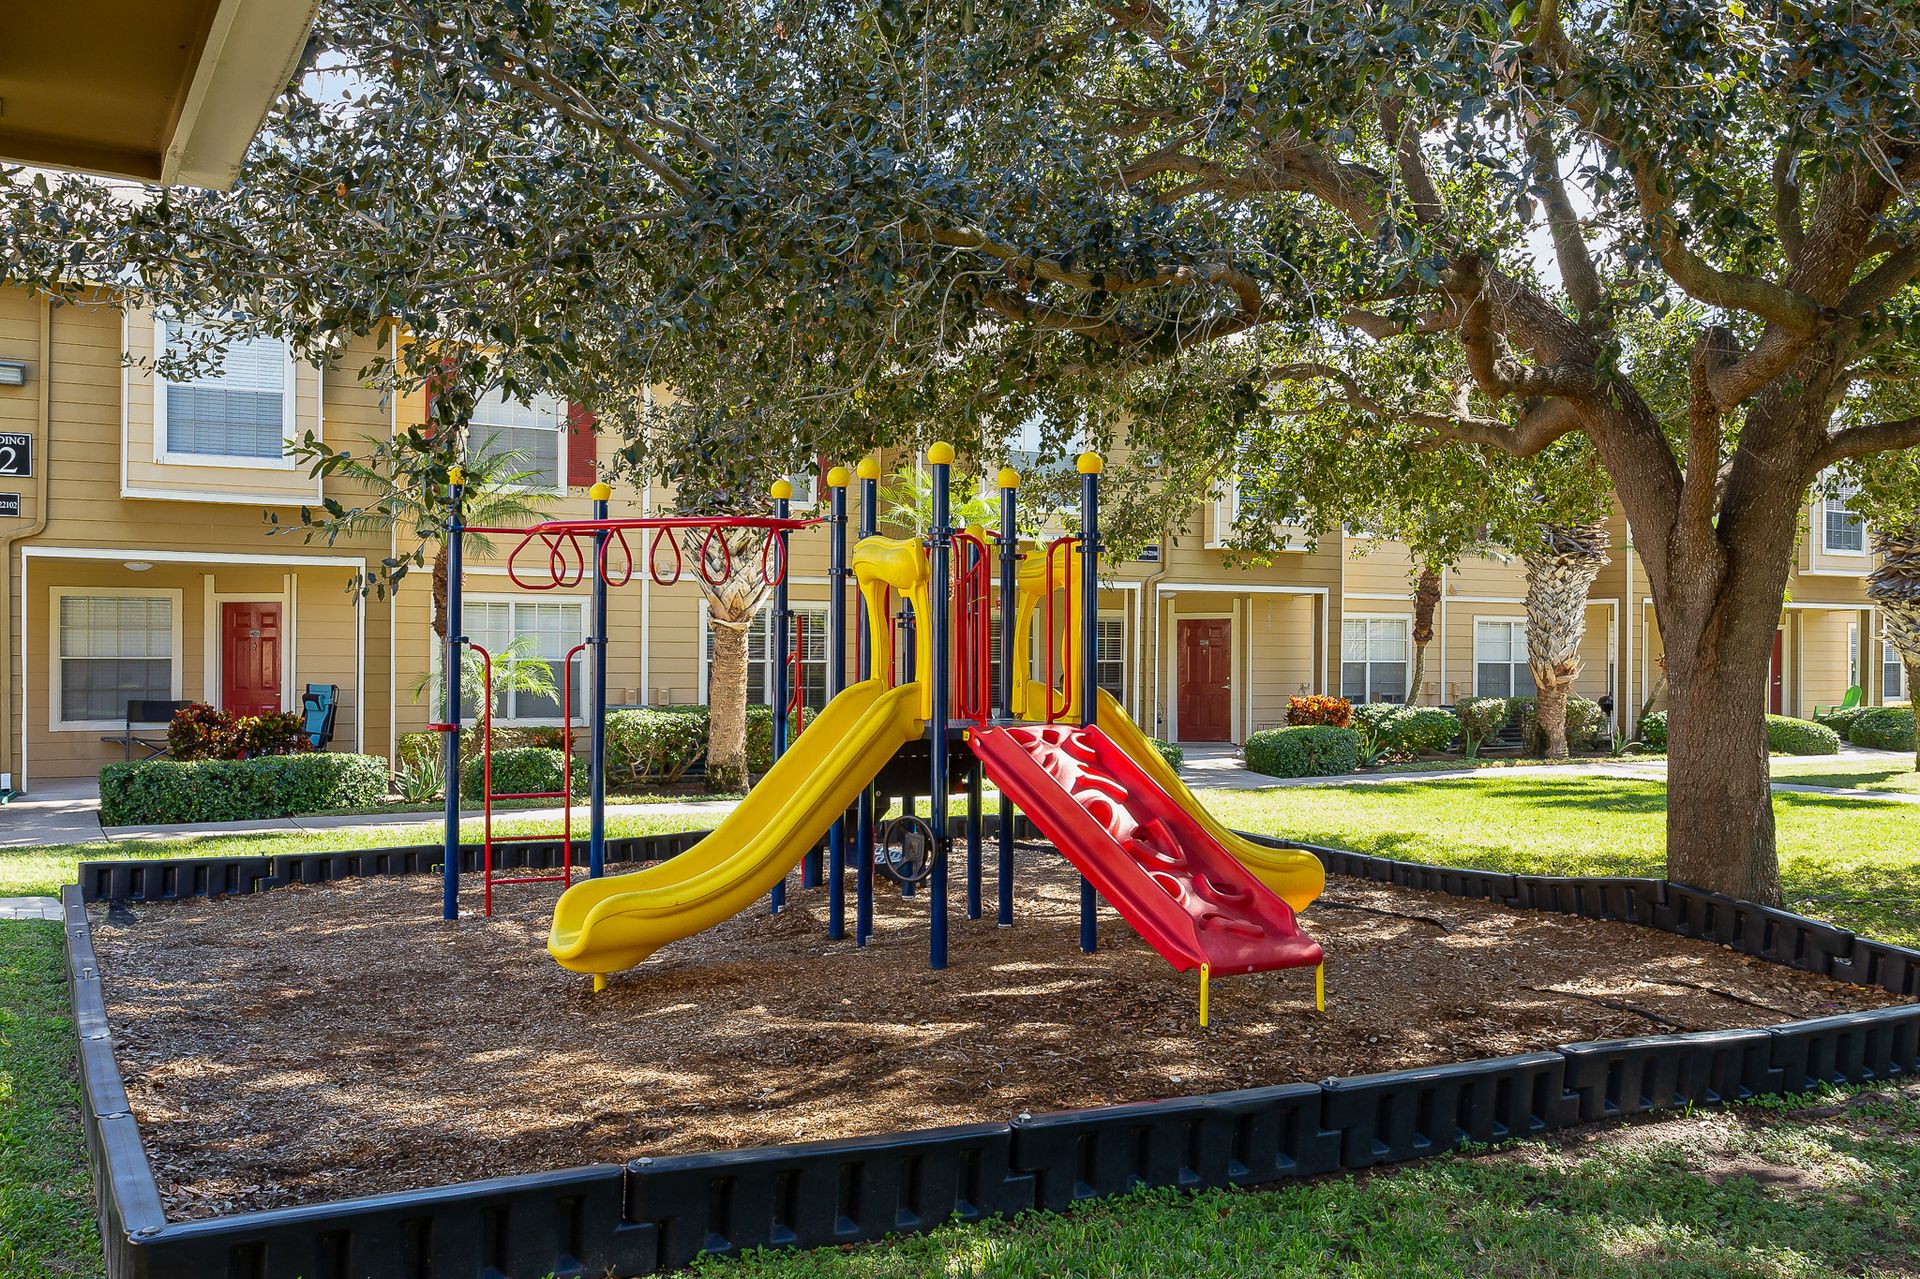 Playcenter and play area in front of apartment buildings